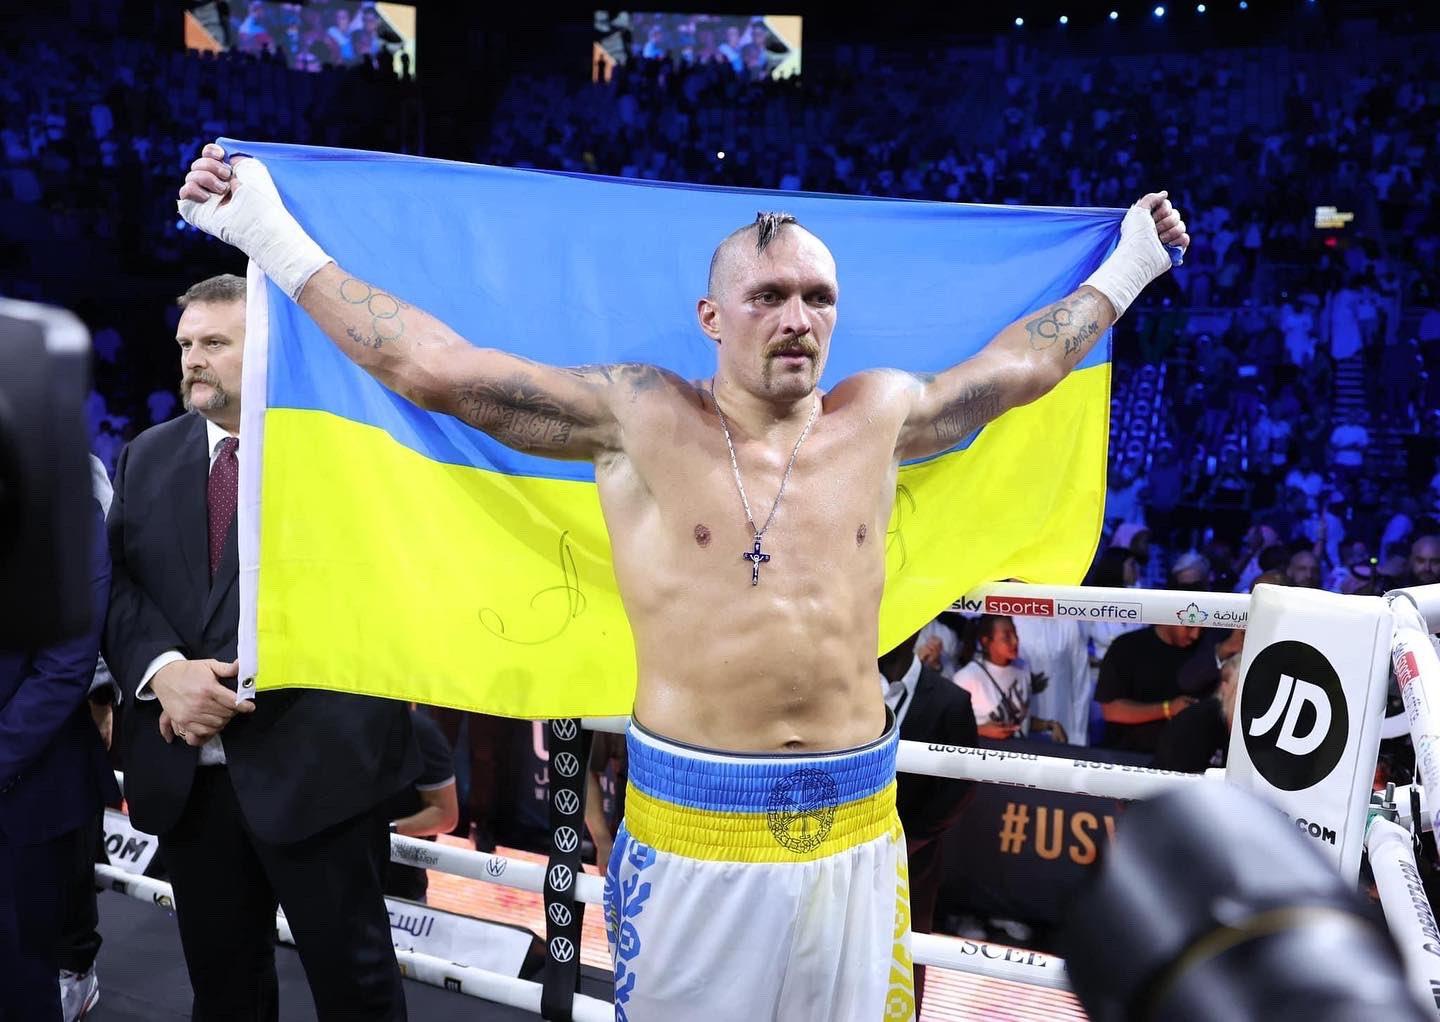 “To everyone who defends my country”: Usyk dedicated the victory over Joshua to Ukraine and the Armed Forces of Ukraine